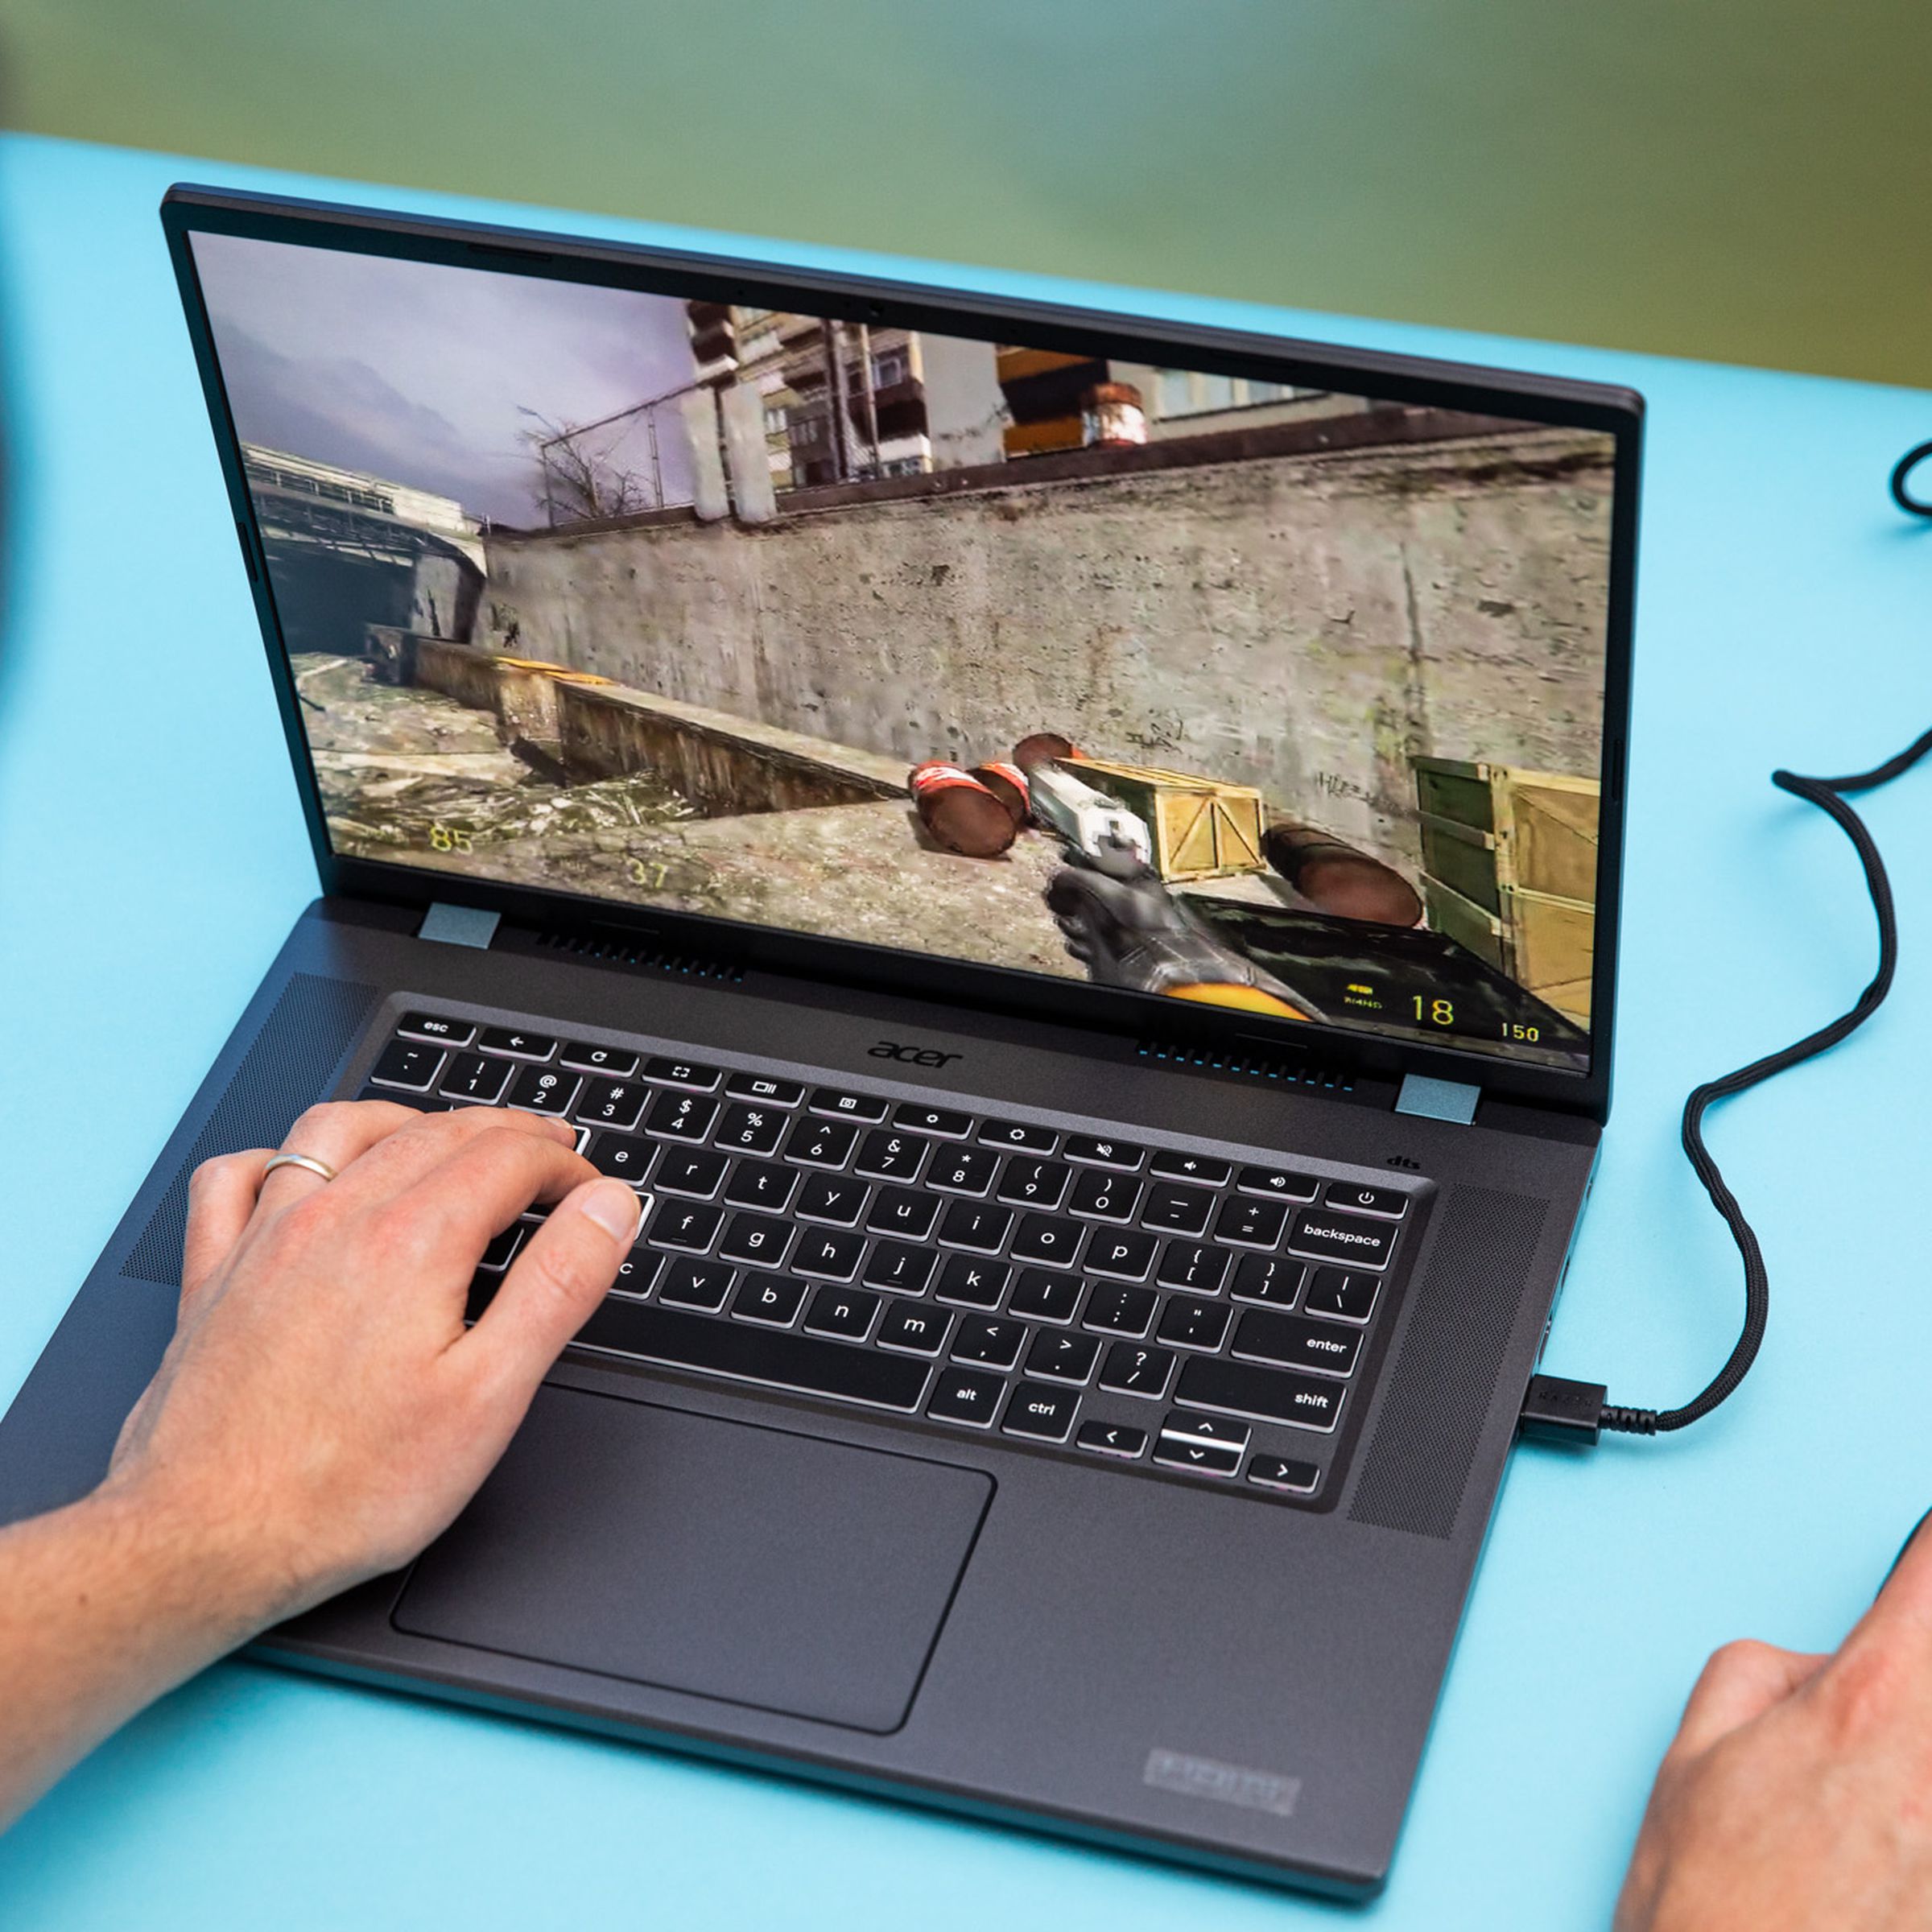 The Acer Chromebook 516 GE gaming laptop with a mouse plugged into its USB port. It’s running the game Half-Life 2.